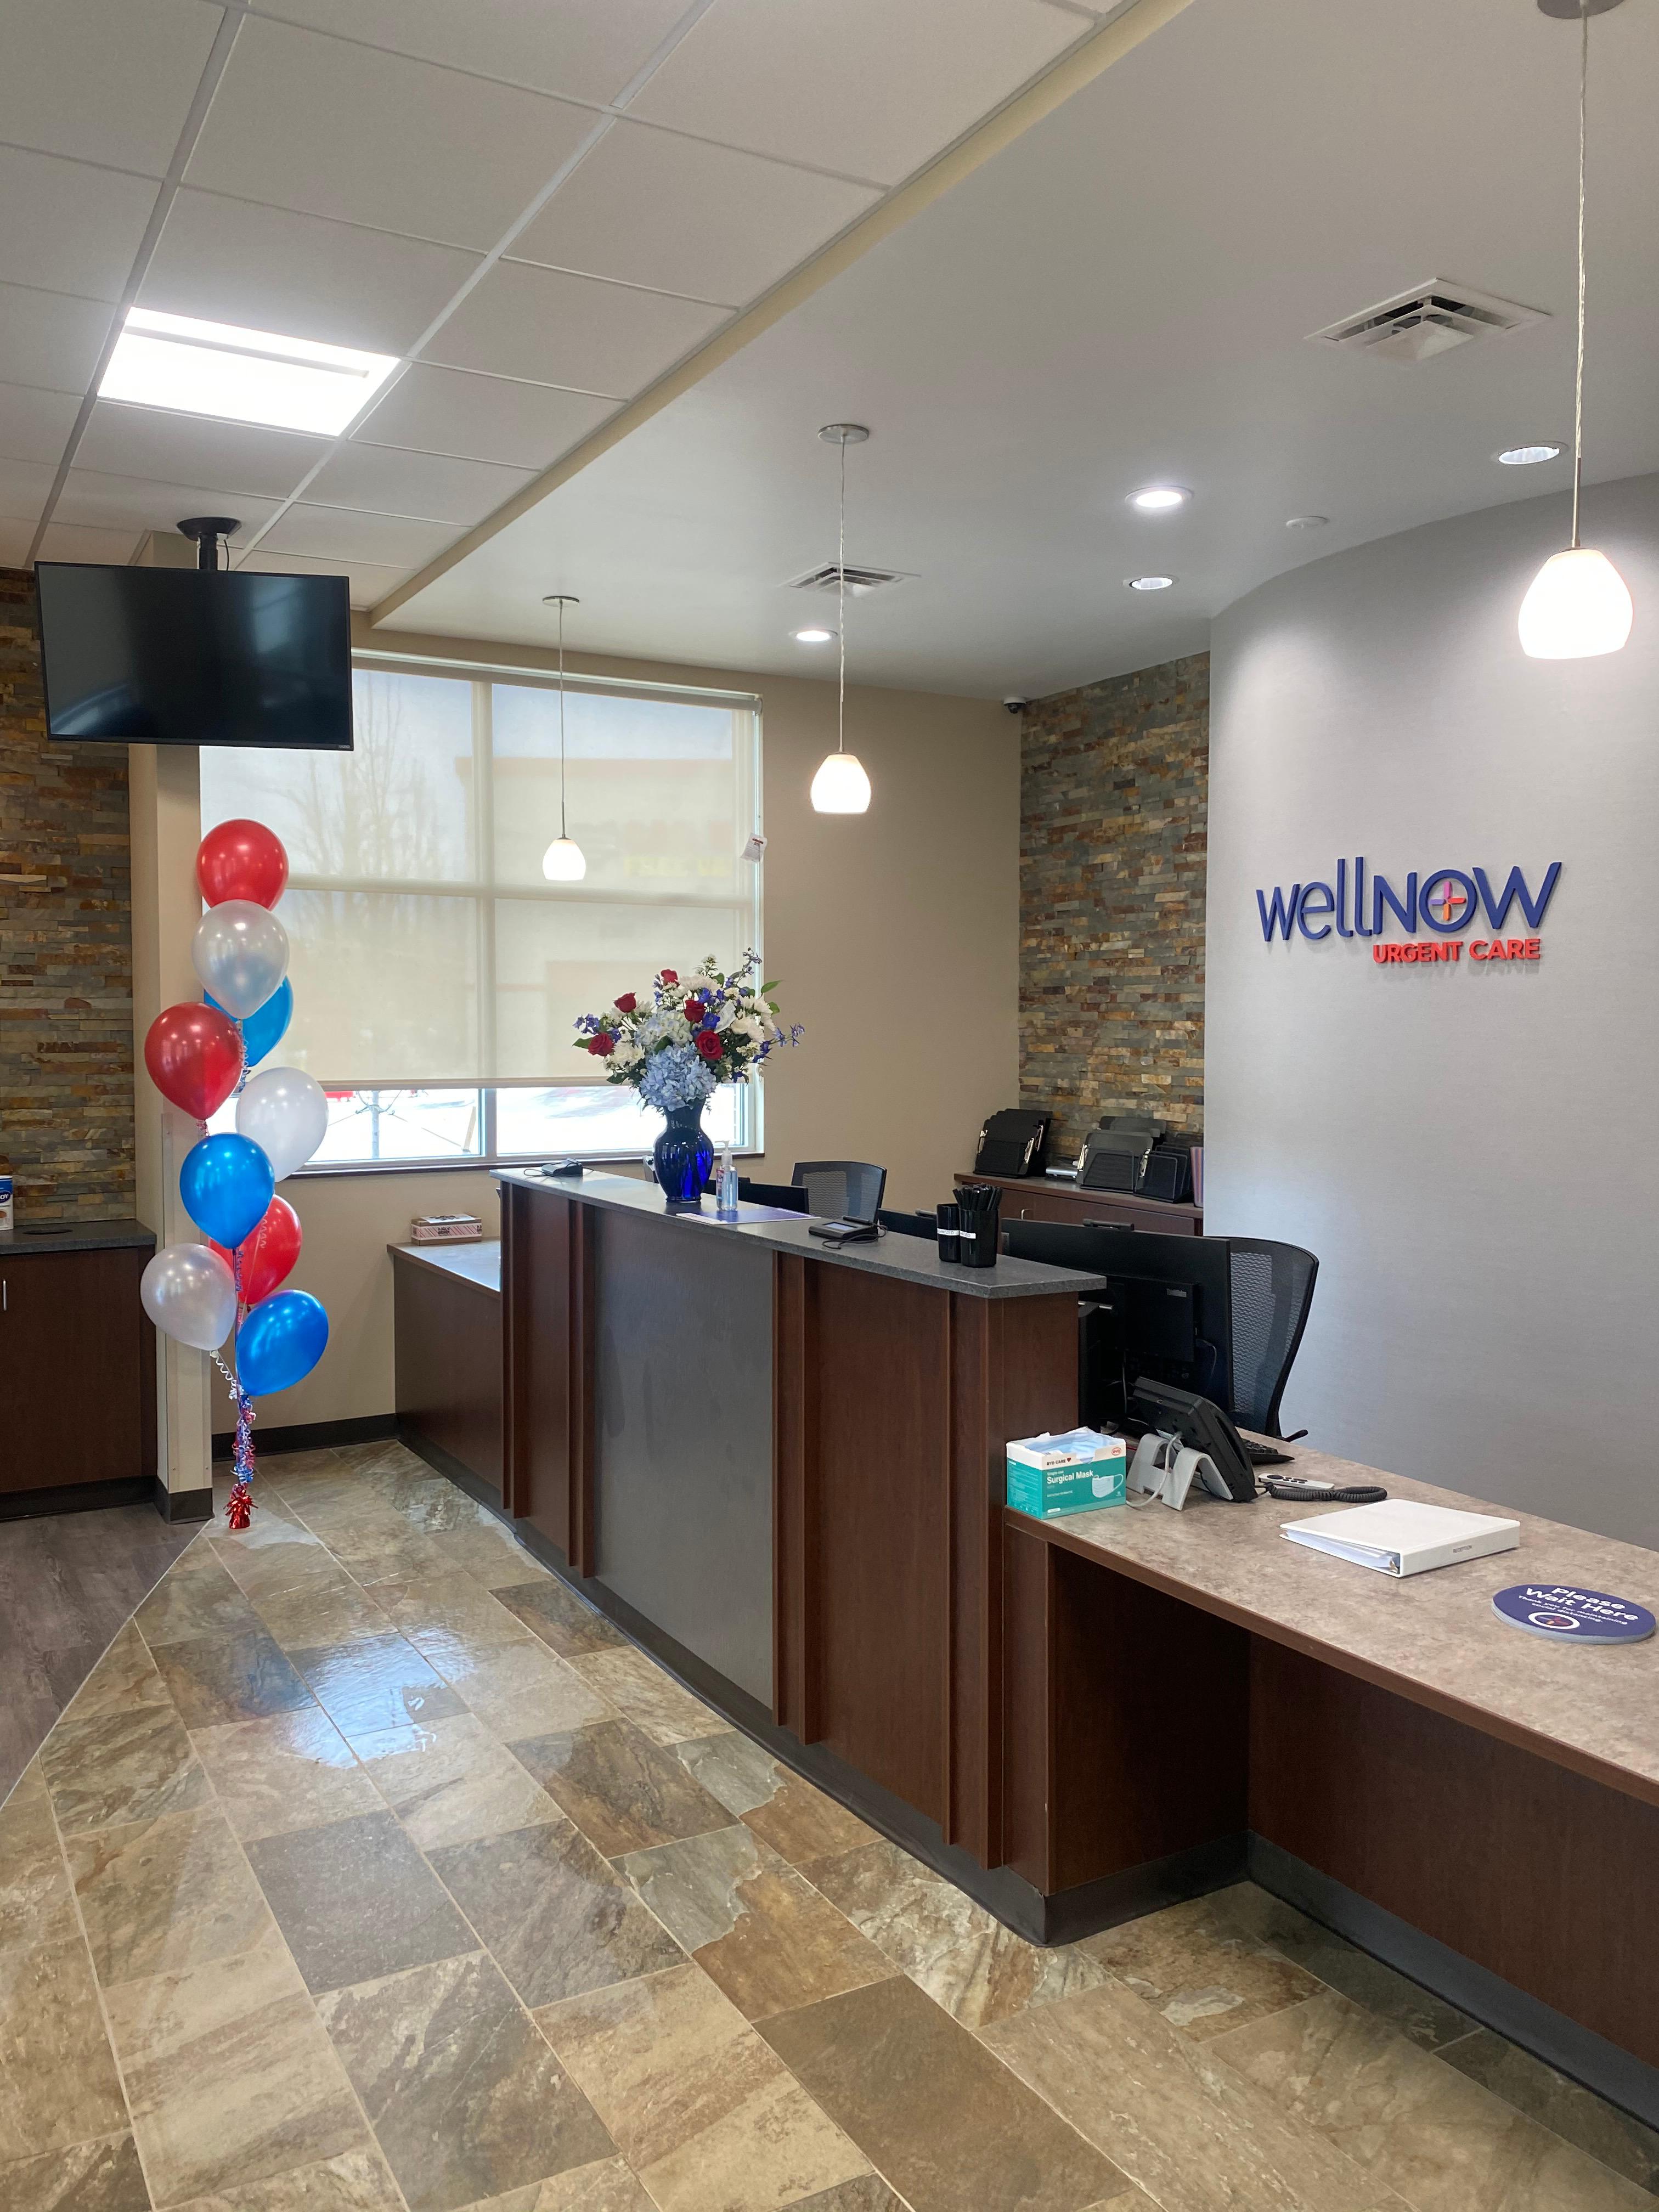 WellNow Urgent Care center provides immediate walk-in treatment for illnesses and injuries, wellness WellNow Urgent Care Fayetteville (315)679-4367